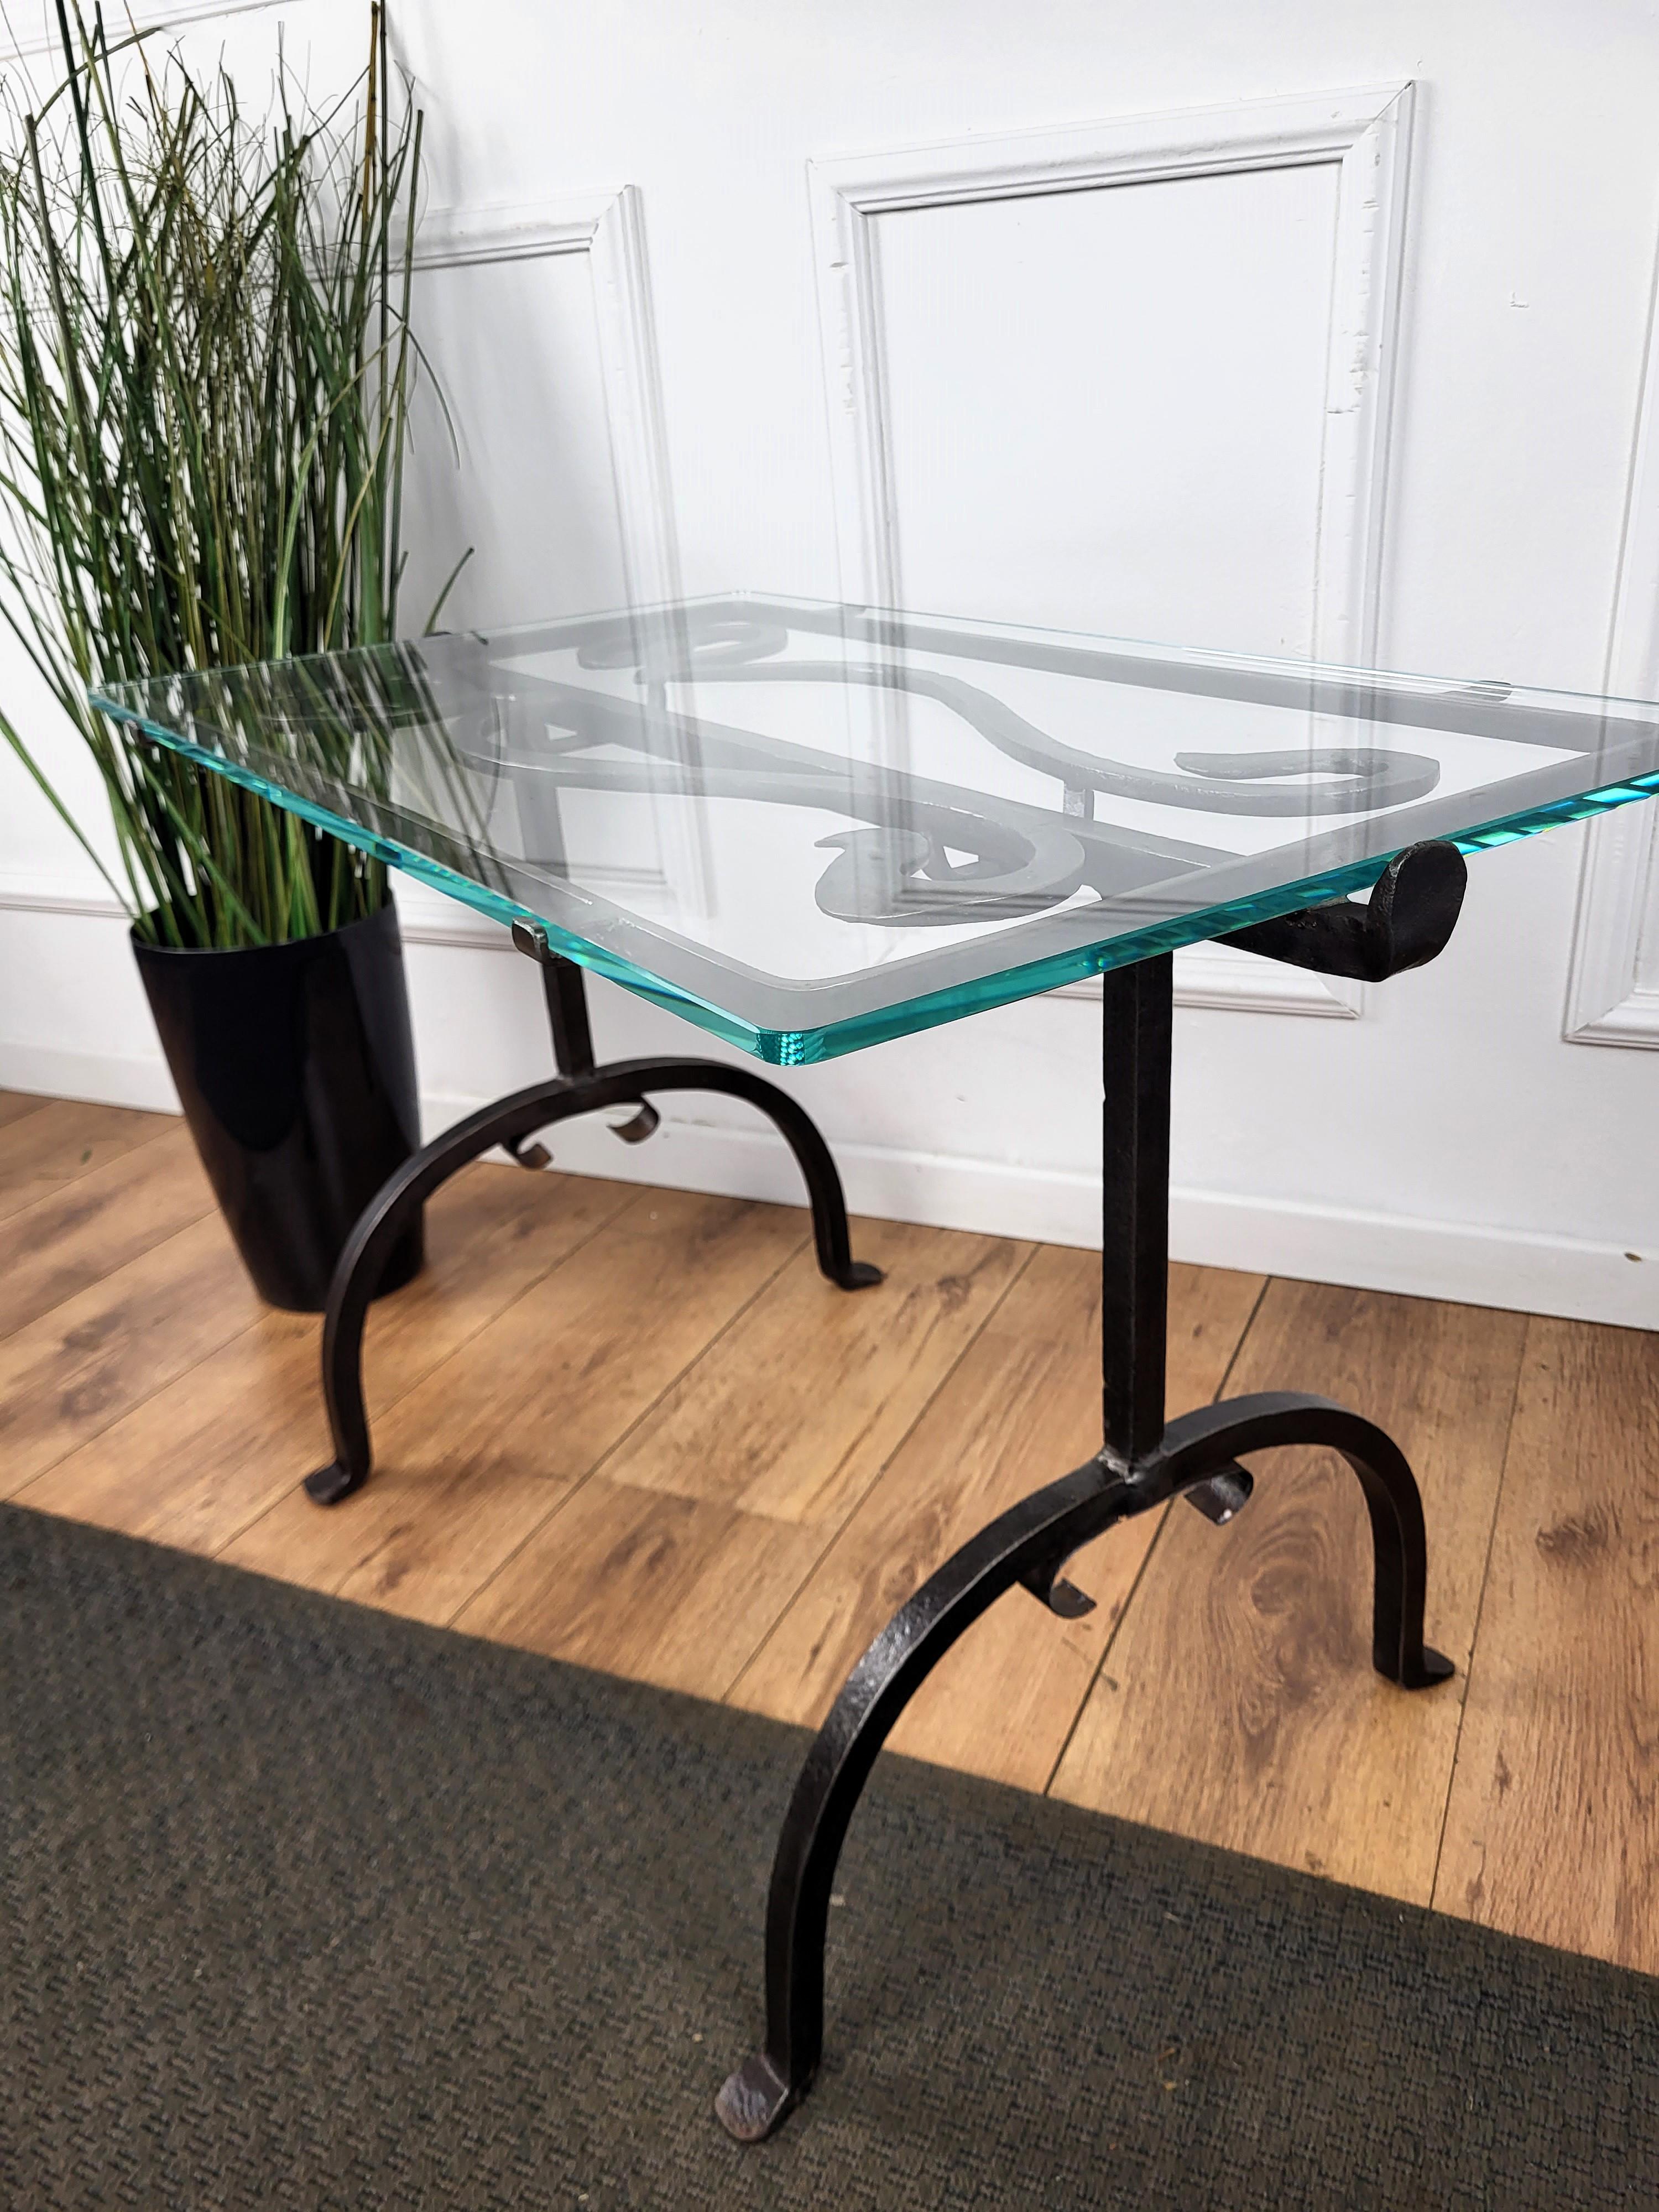 Italian Sculptural Brutalist Wrought Iron and Glass Coffee Table or Side Table For Sale 1